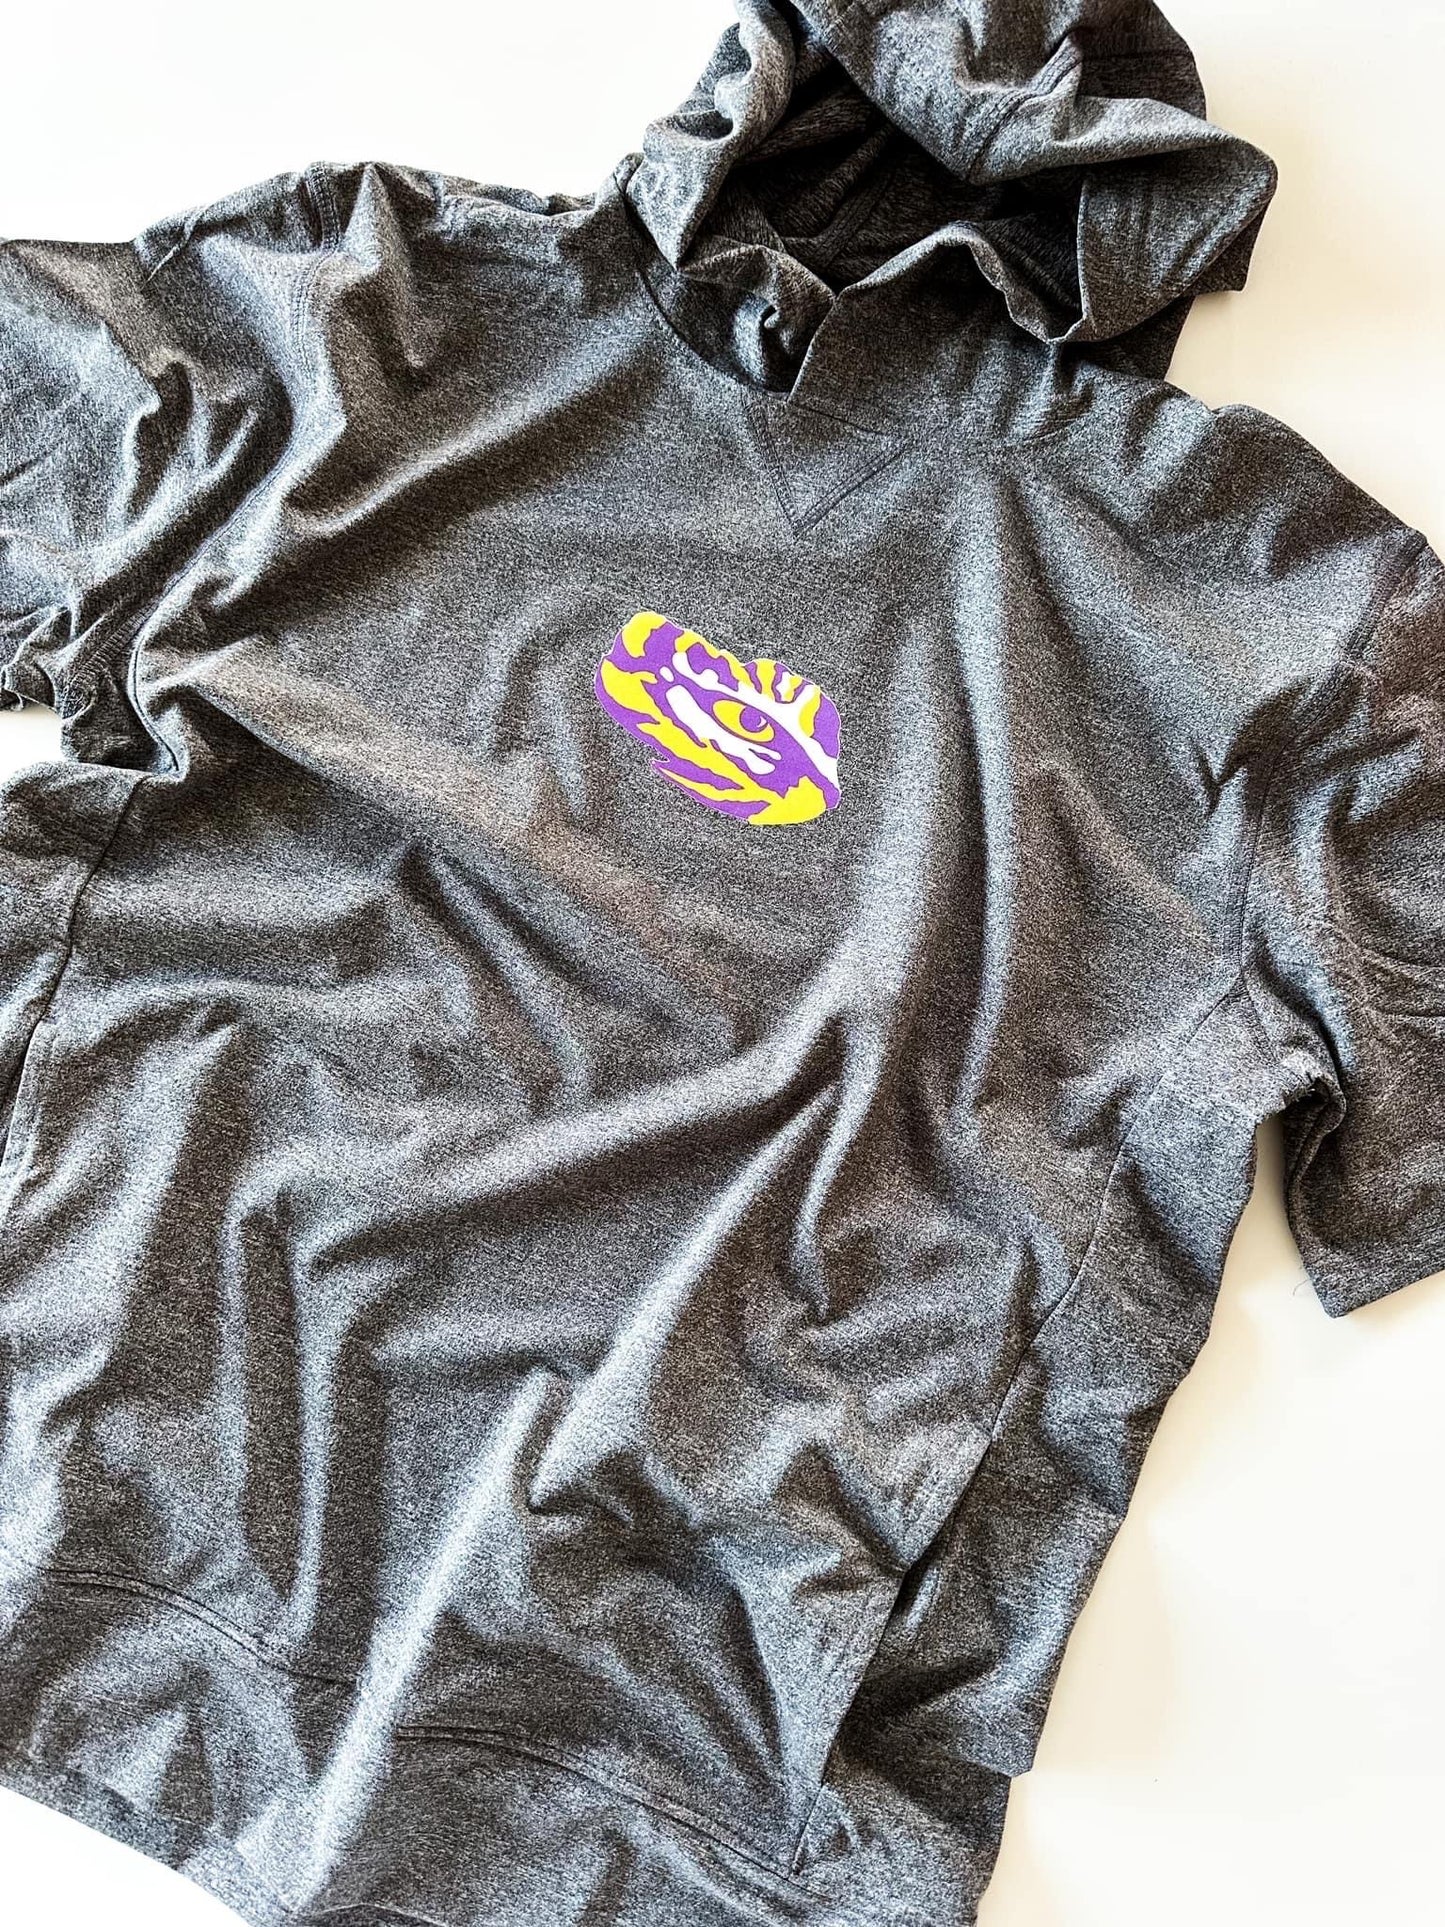 Springville Tigers Minimal Performance Hoodie | Youth-Sister Shirts-Sister Shirts, Cute & Custom Tees for Mama & Littles in Trussville, Alabama.